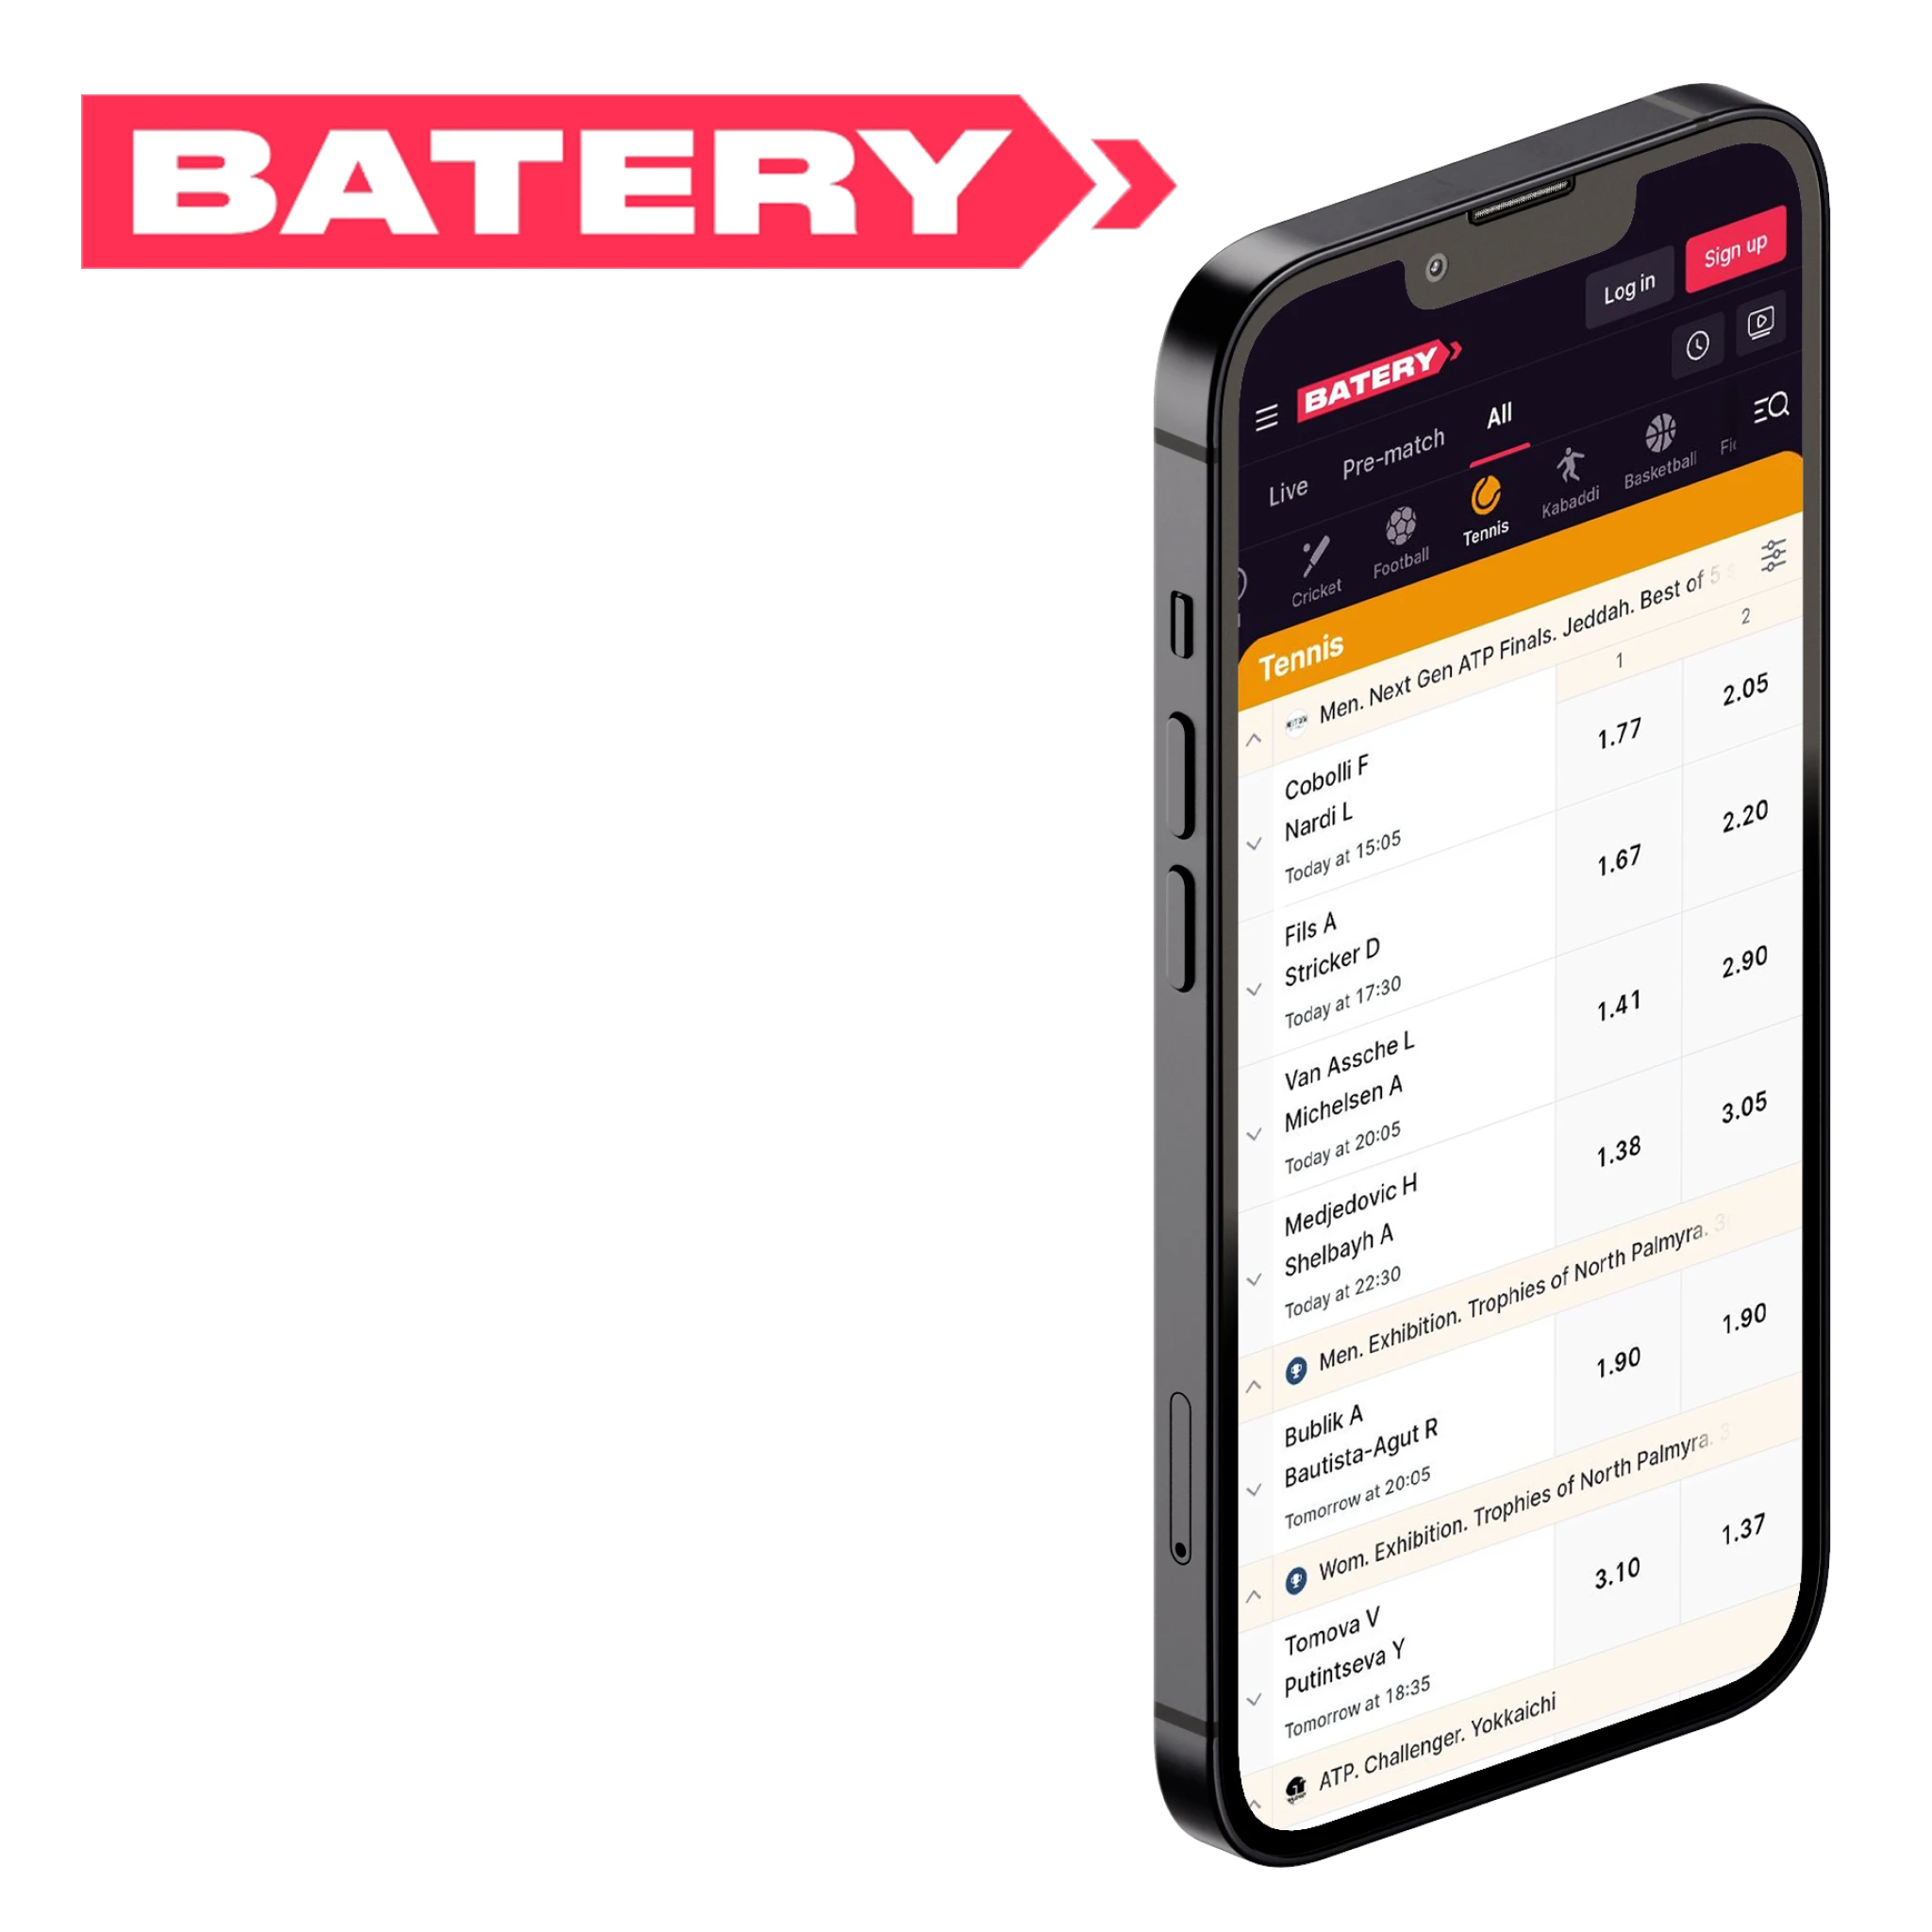 Batery mobile app provides popular deposit and withdrawal methods for tennis betting.